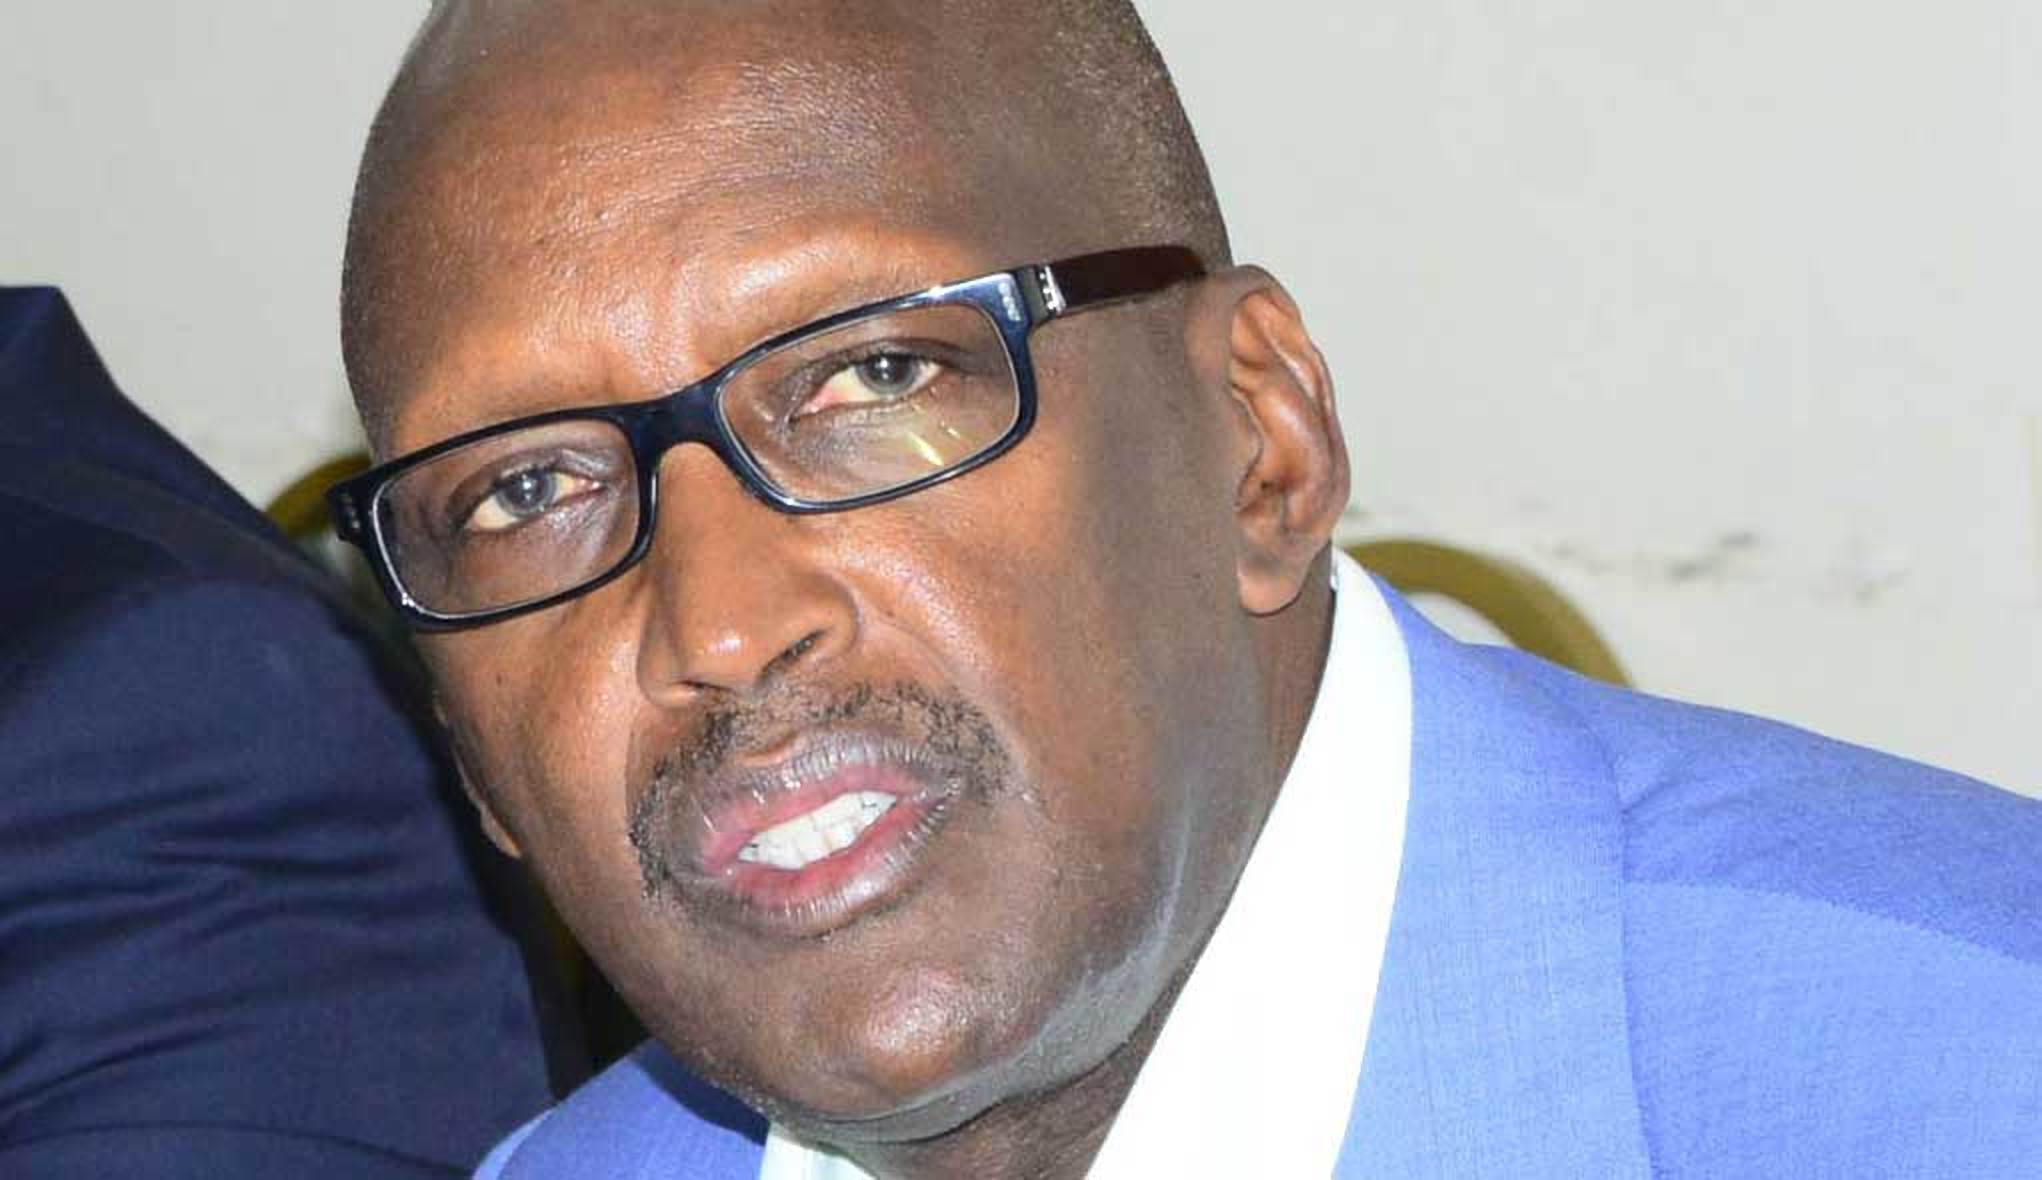 Gen Tumukunde’s Sons arrested for Obstructing Their Father’s Arrest